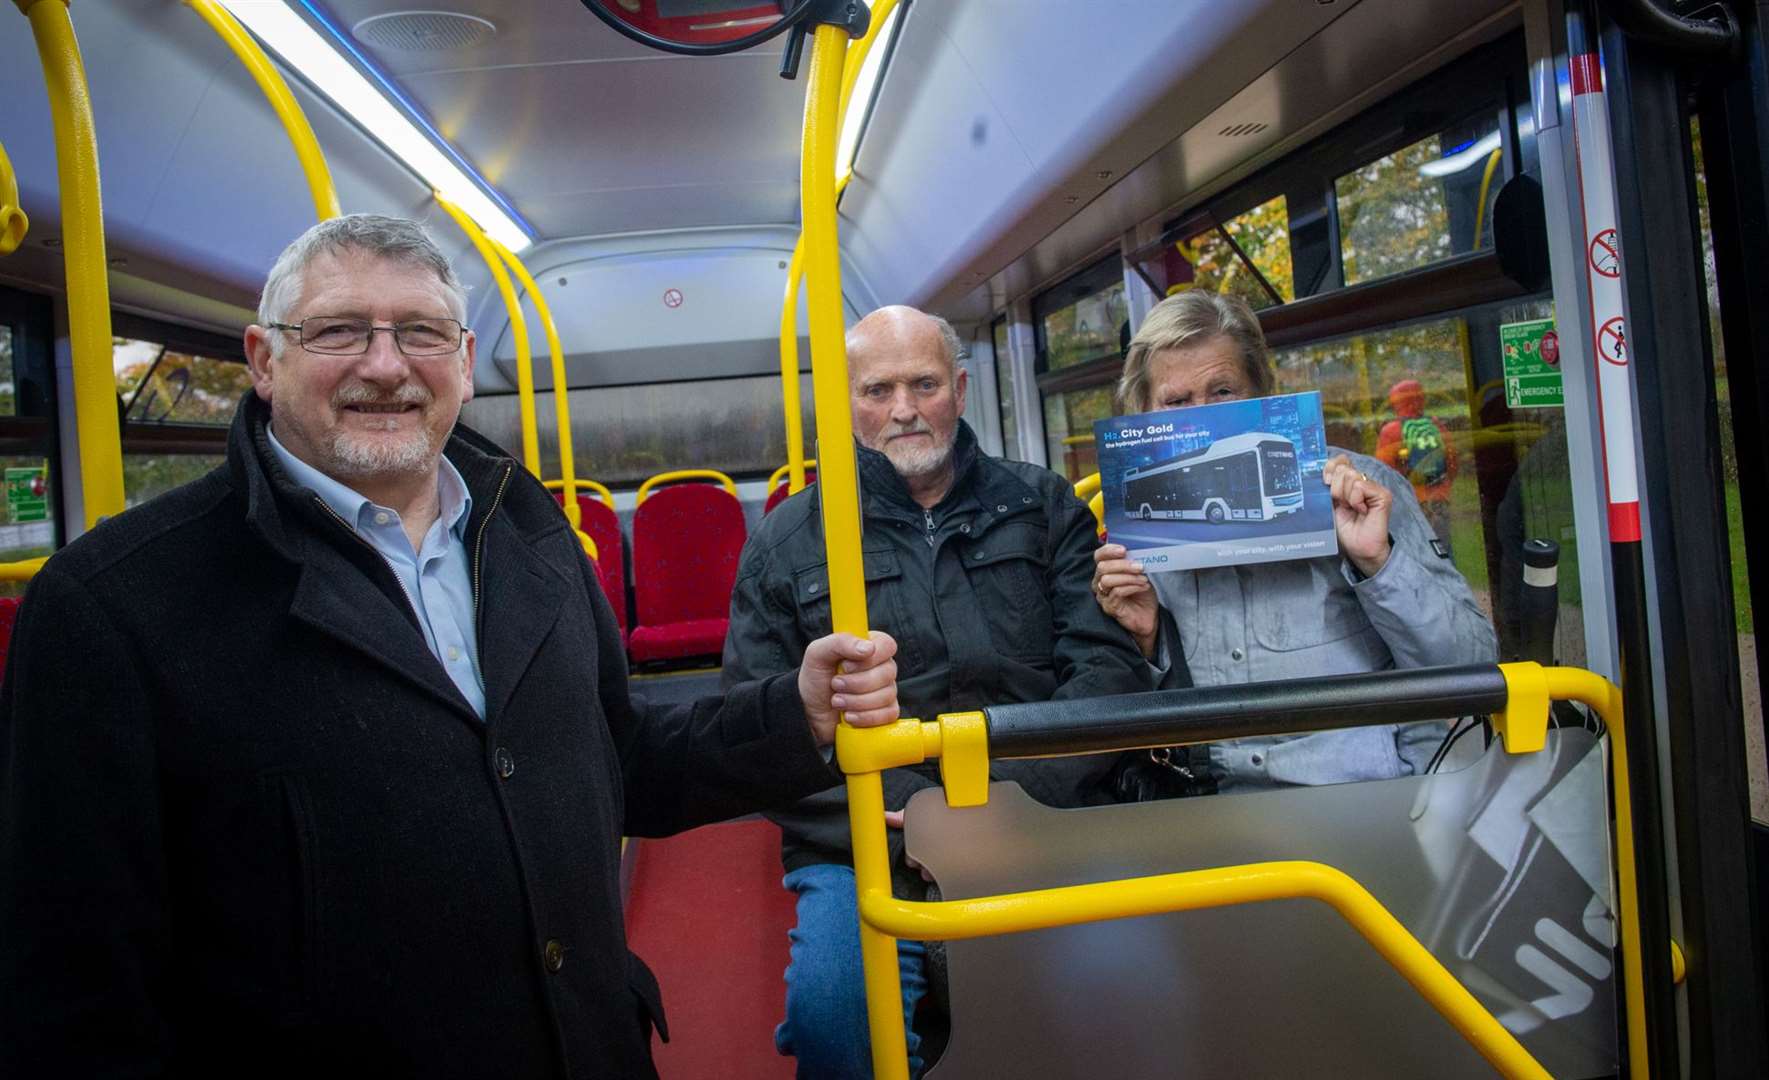 Tony Tomsett from Caetano with Brian and Bonnie Sime on the H2.City Gold hydrogen fuel cell bus.